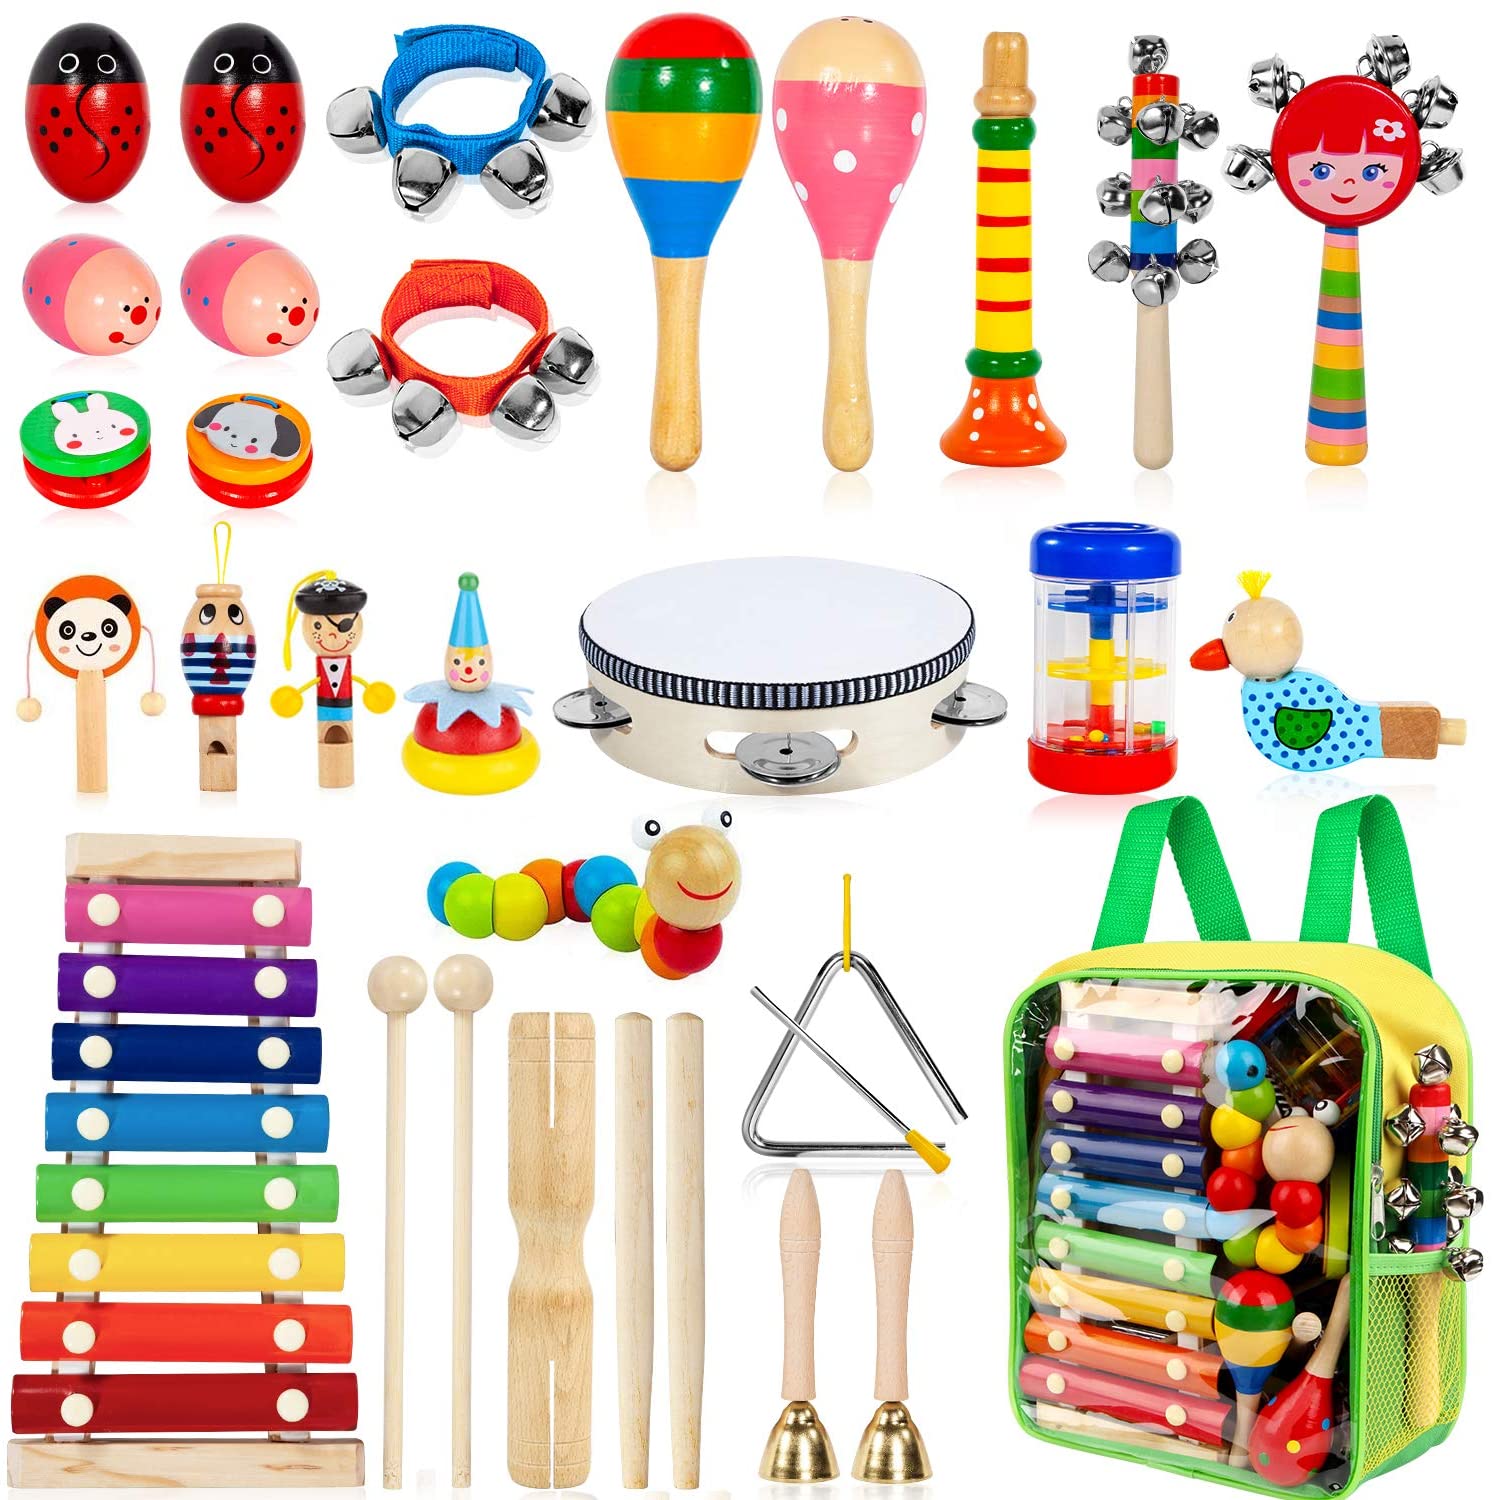 Taimasi Assorted Kids Percussion Musical Instruments, 33-Piece